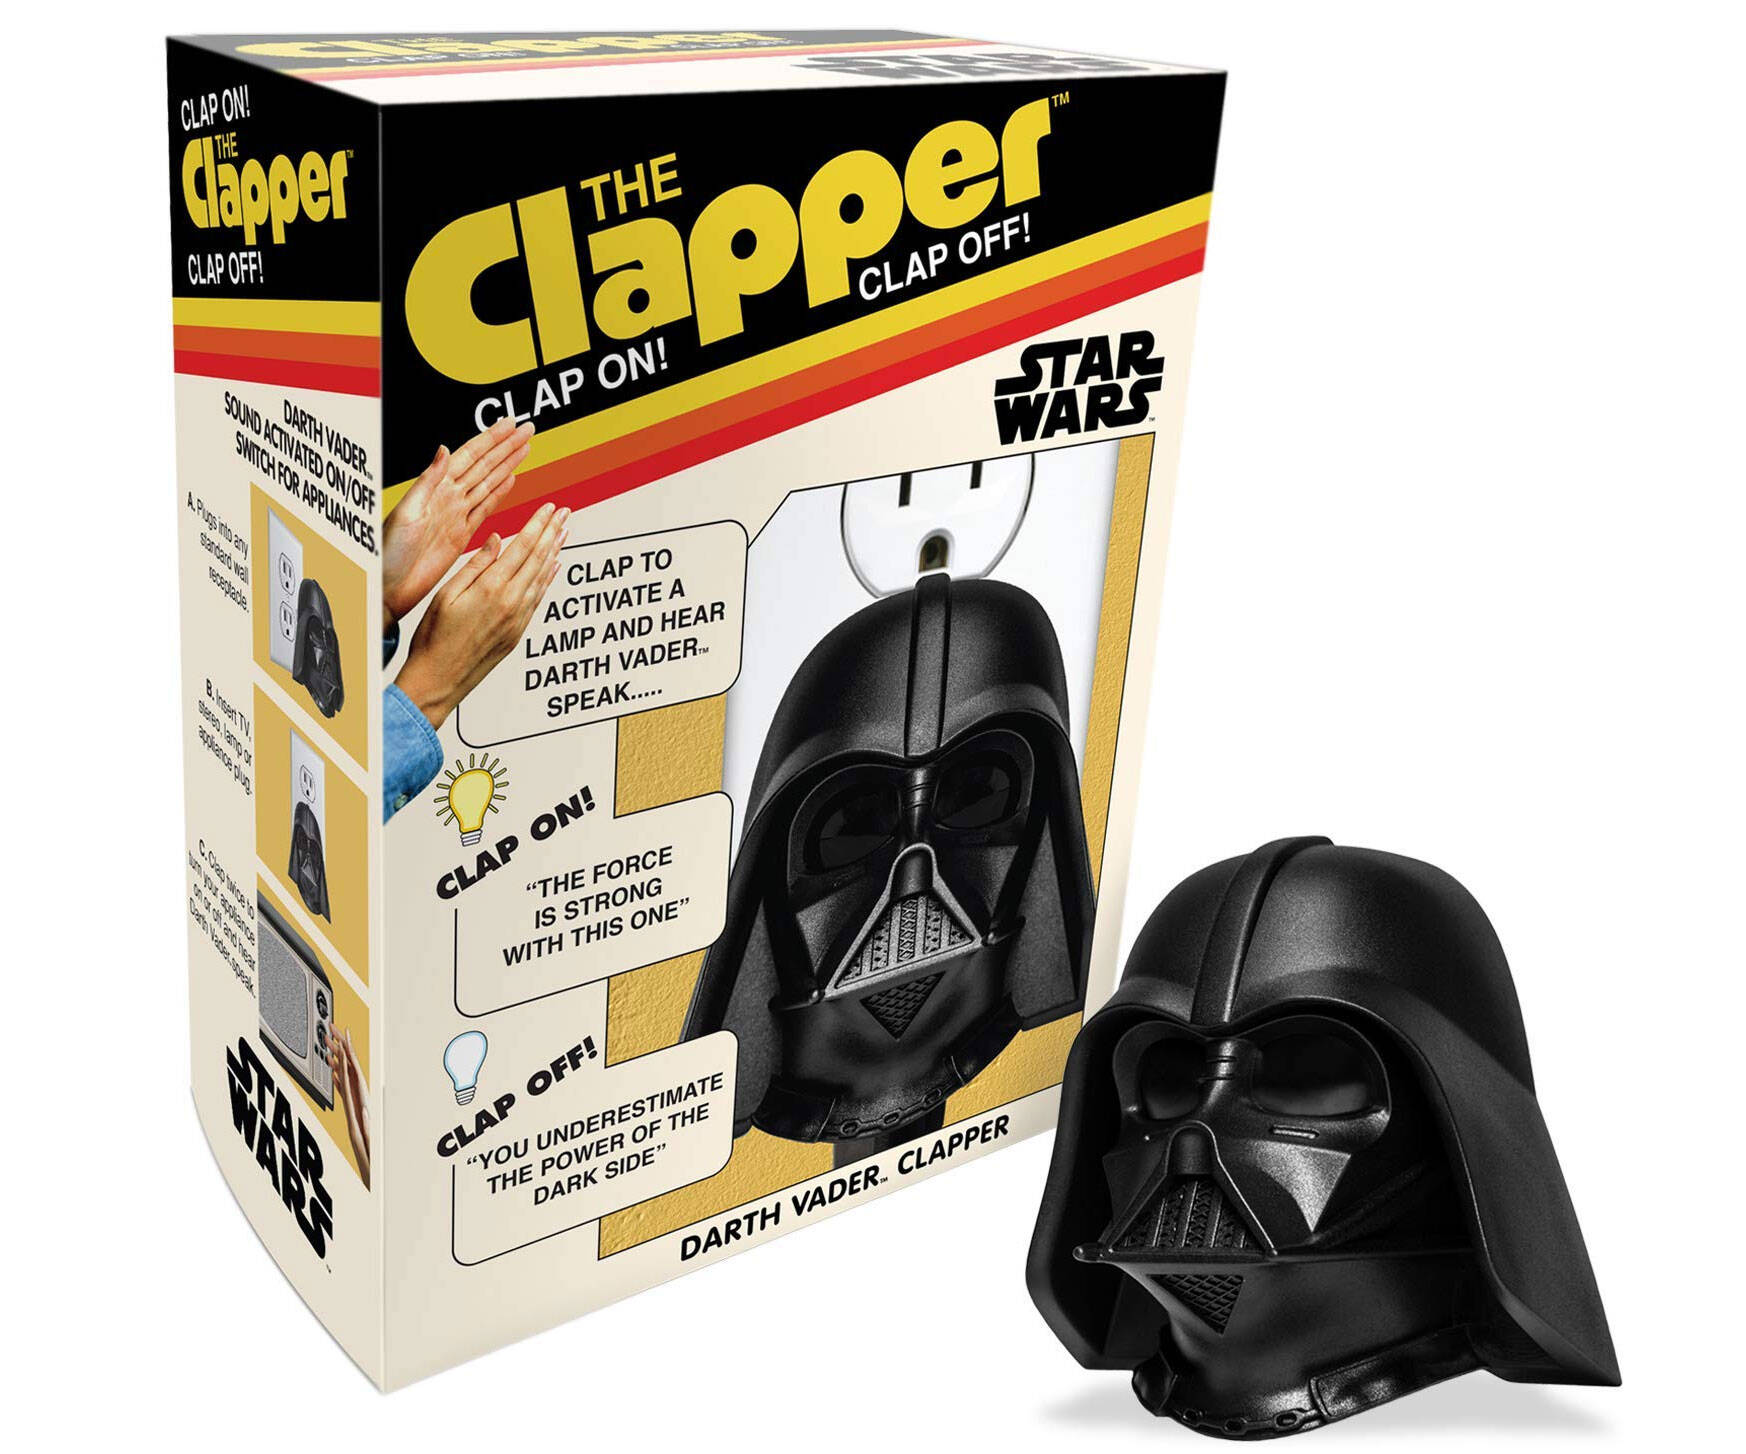 Star Wars Darth Vader Clapper - coolthings.us